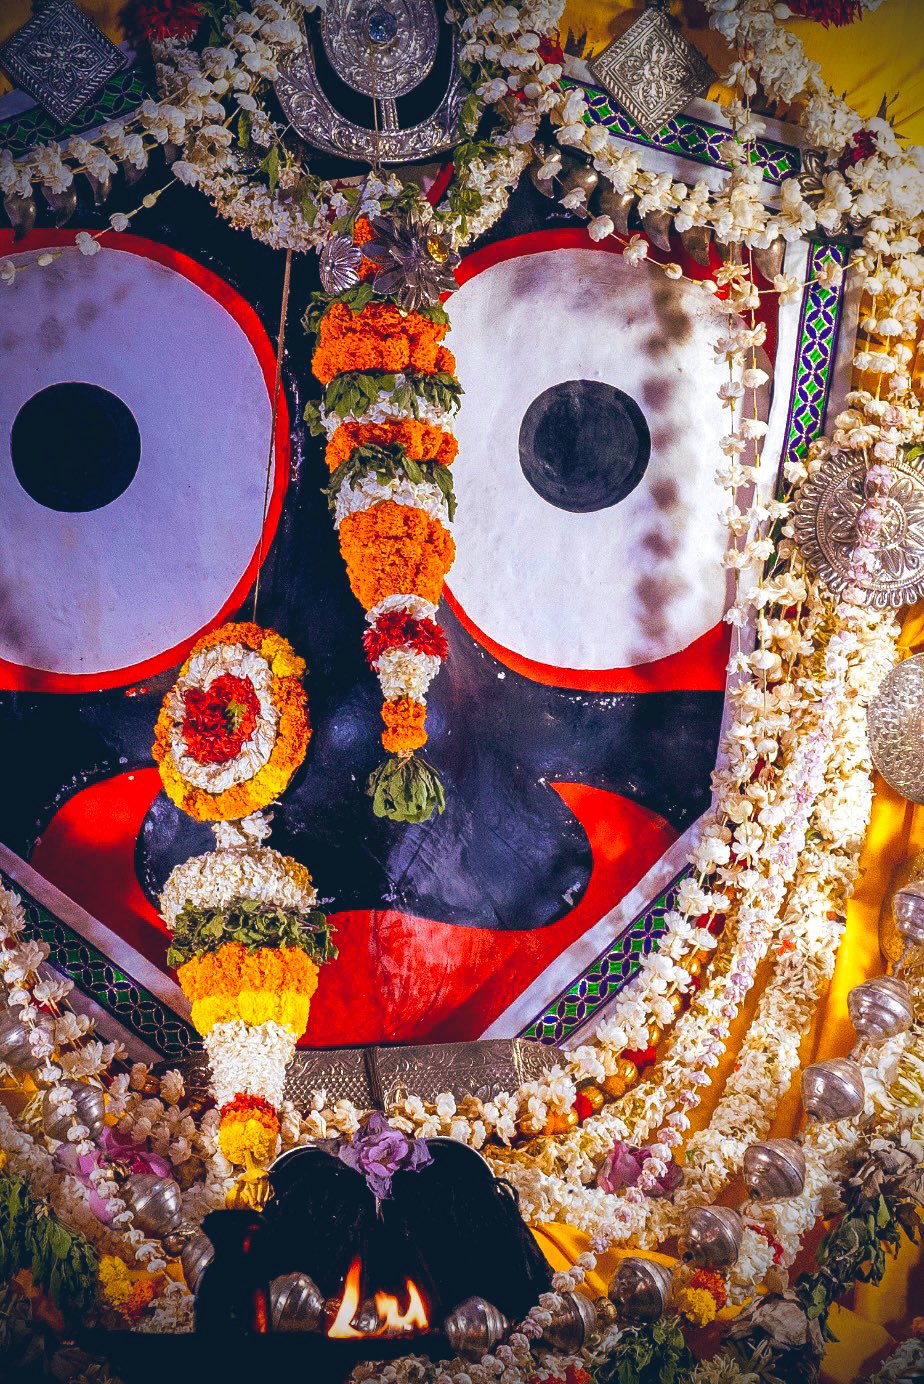 Loard Jagannath Wallpaper - Download to your mobile from PHONEKY